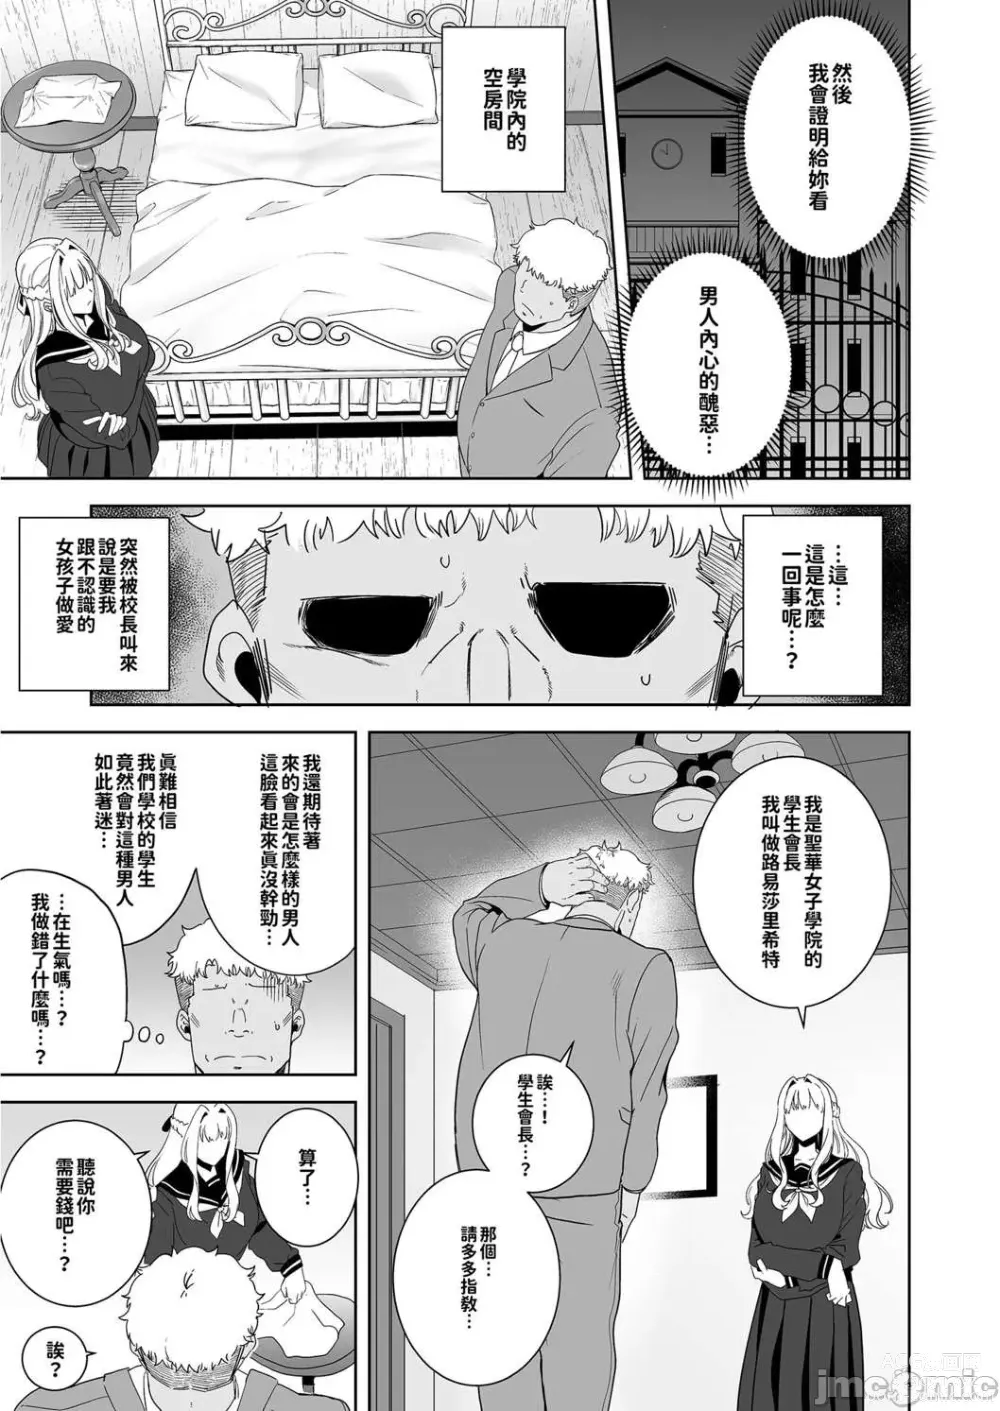 Page 7 of doujinshi 聖華女学院高等部公認竿おじさん 4